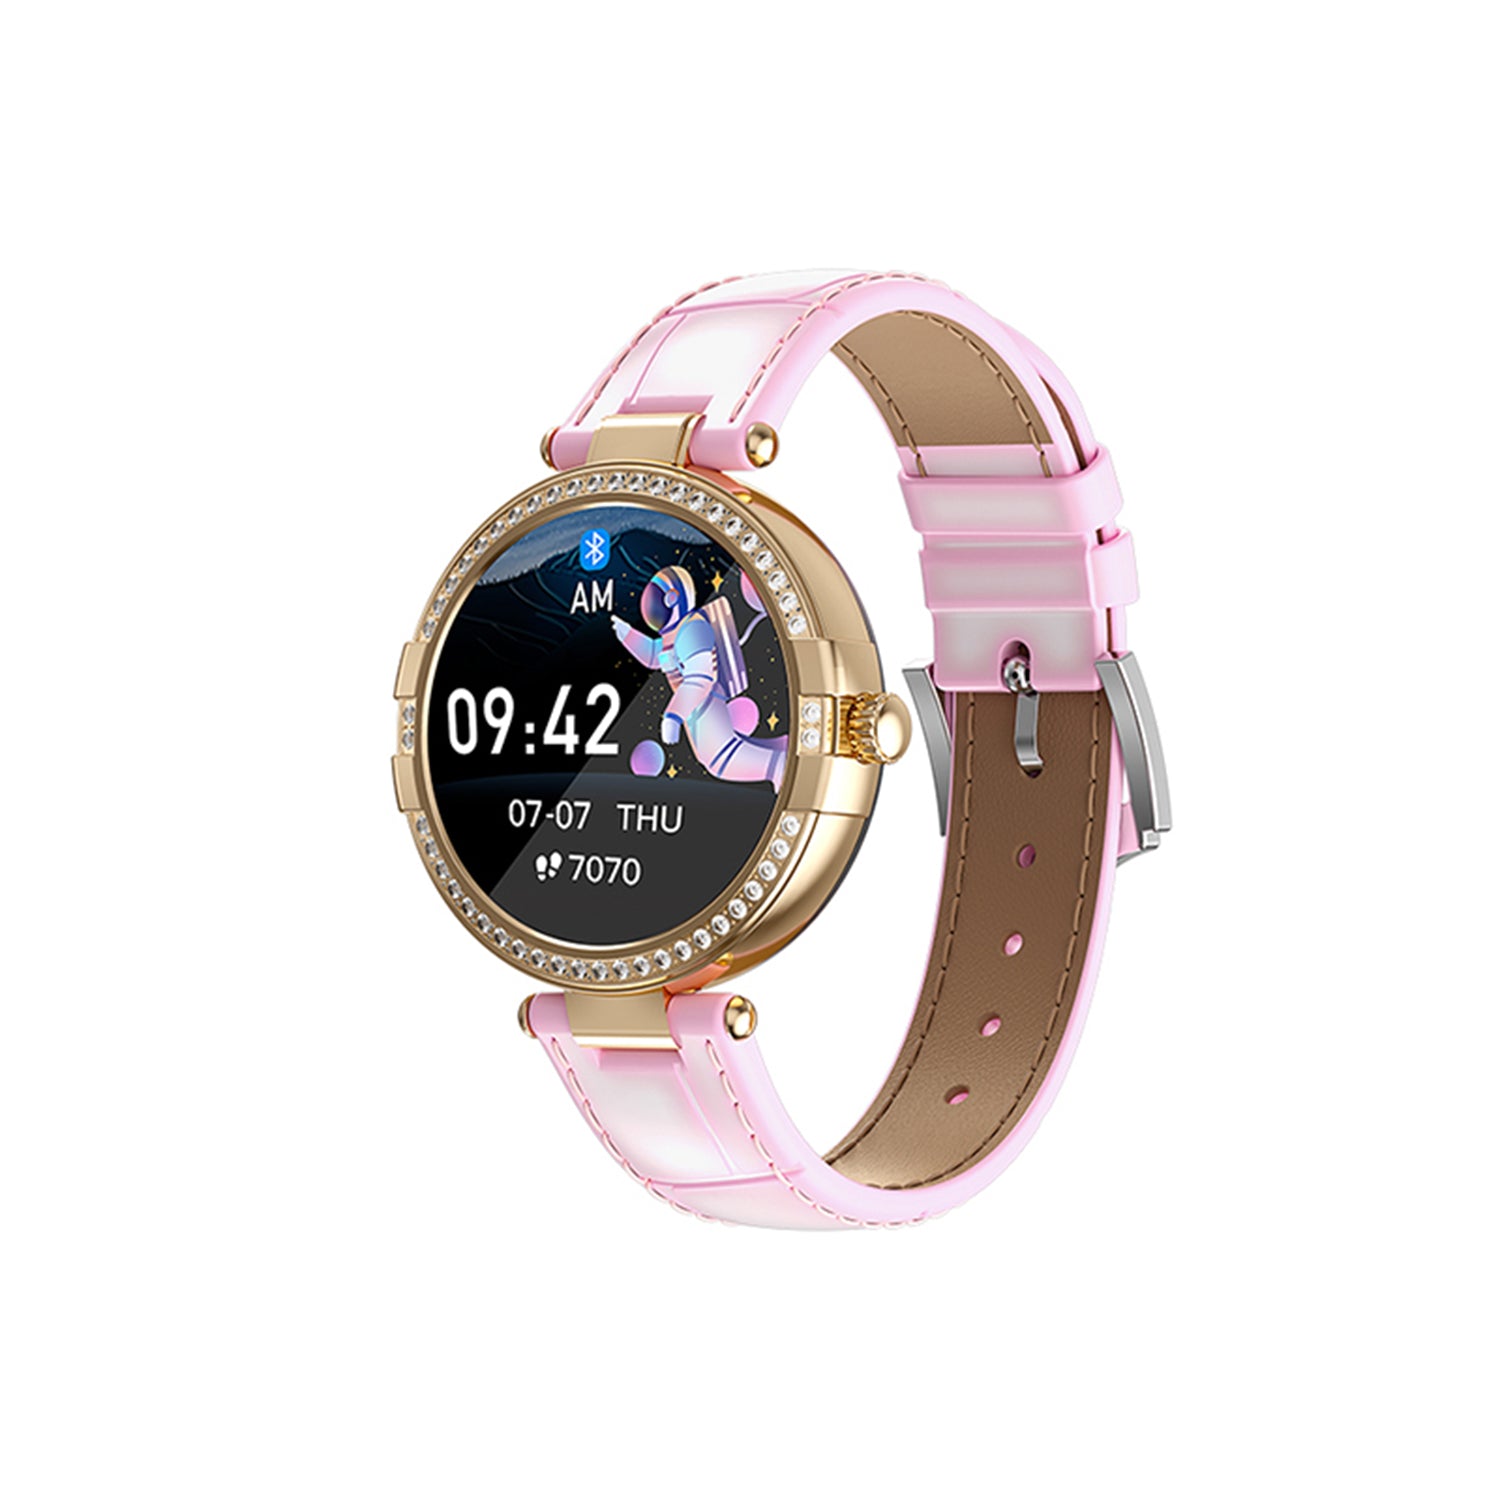 HAVIT M9015 Smart Watch for Women, Body Temperature Heart Rate Monitor & Physiological Health Reminder